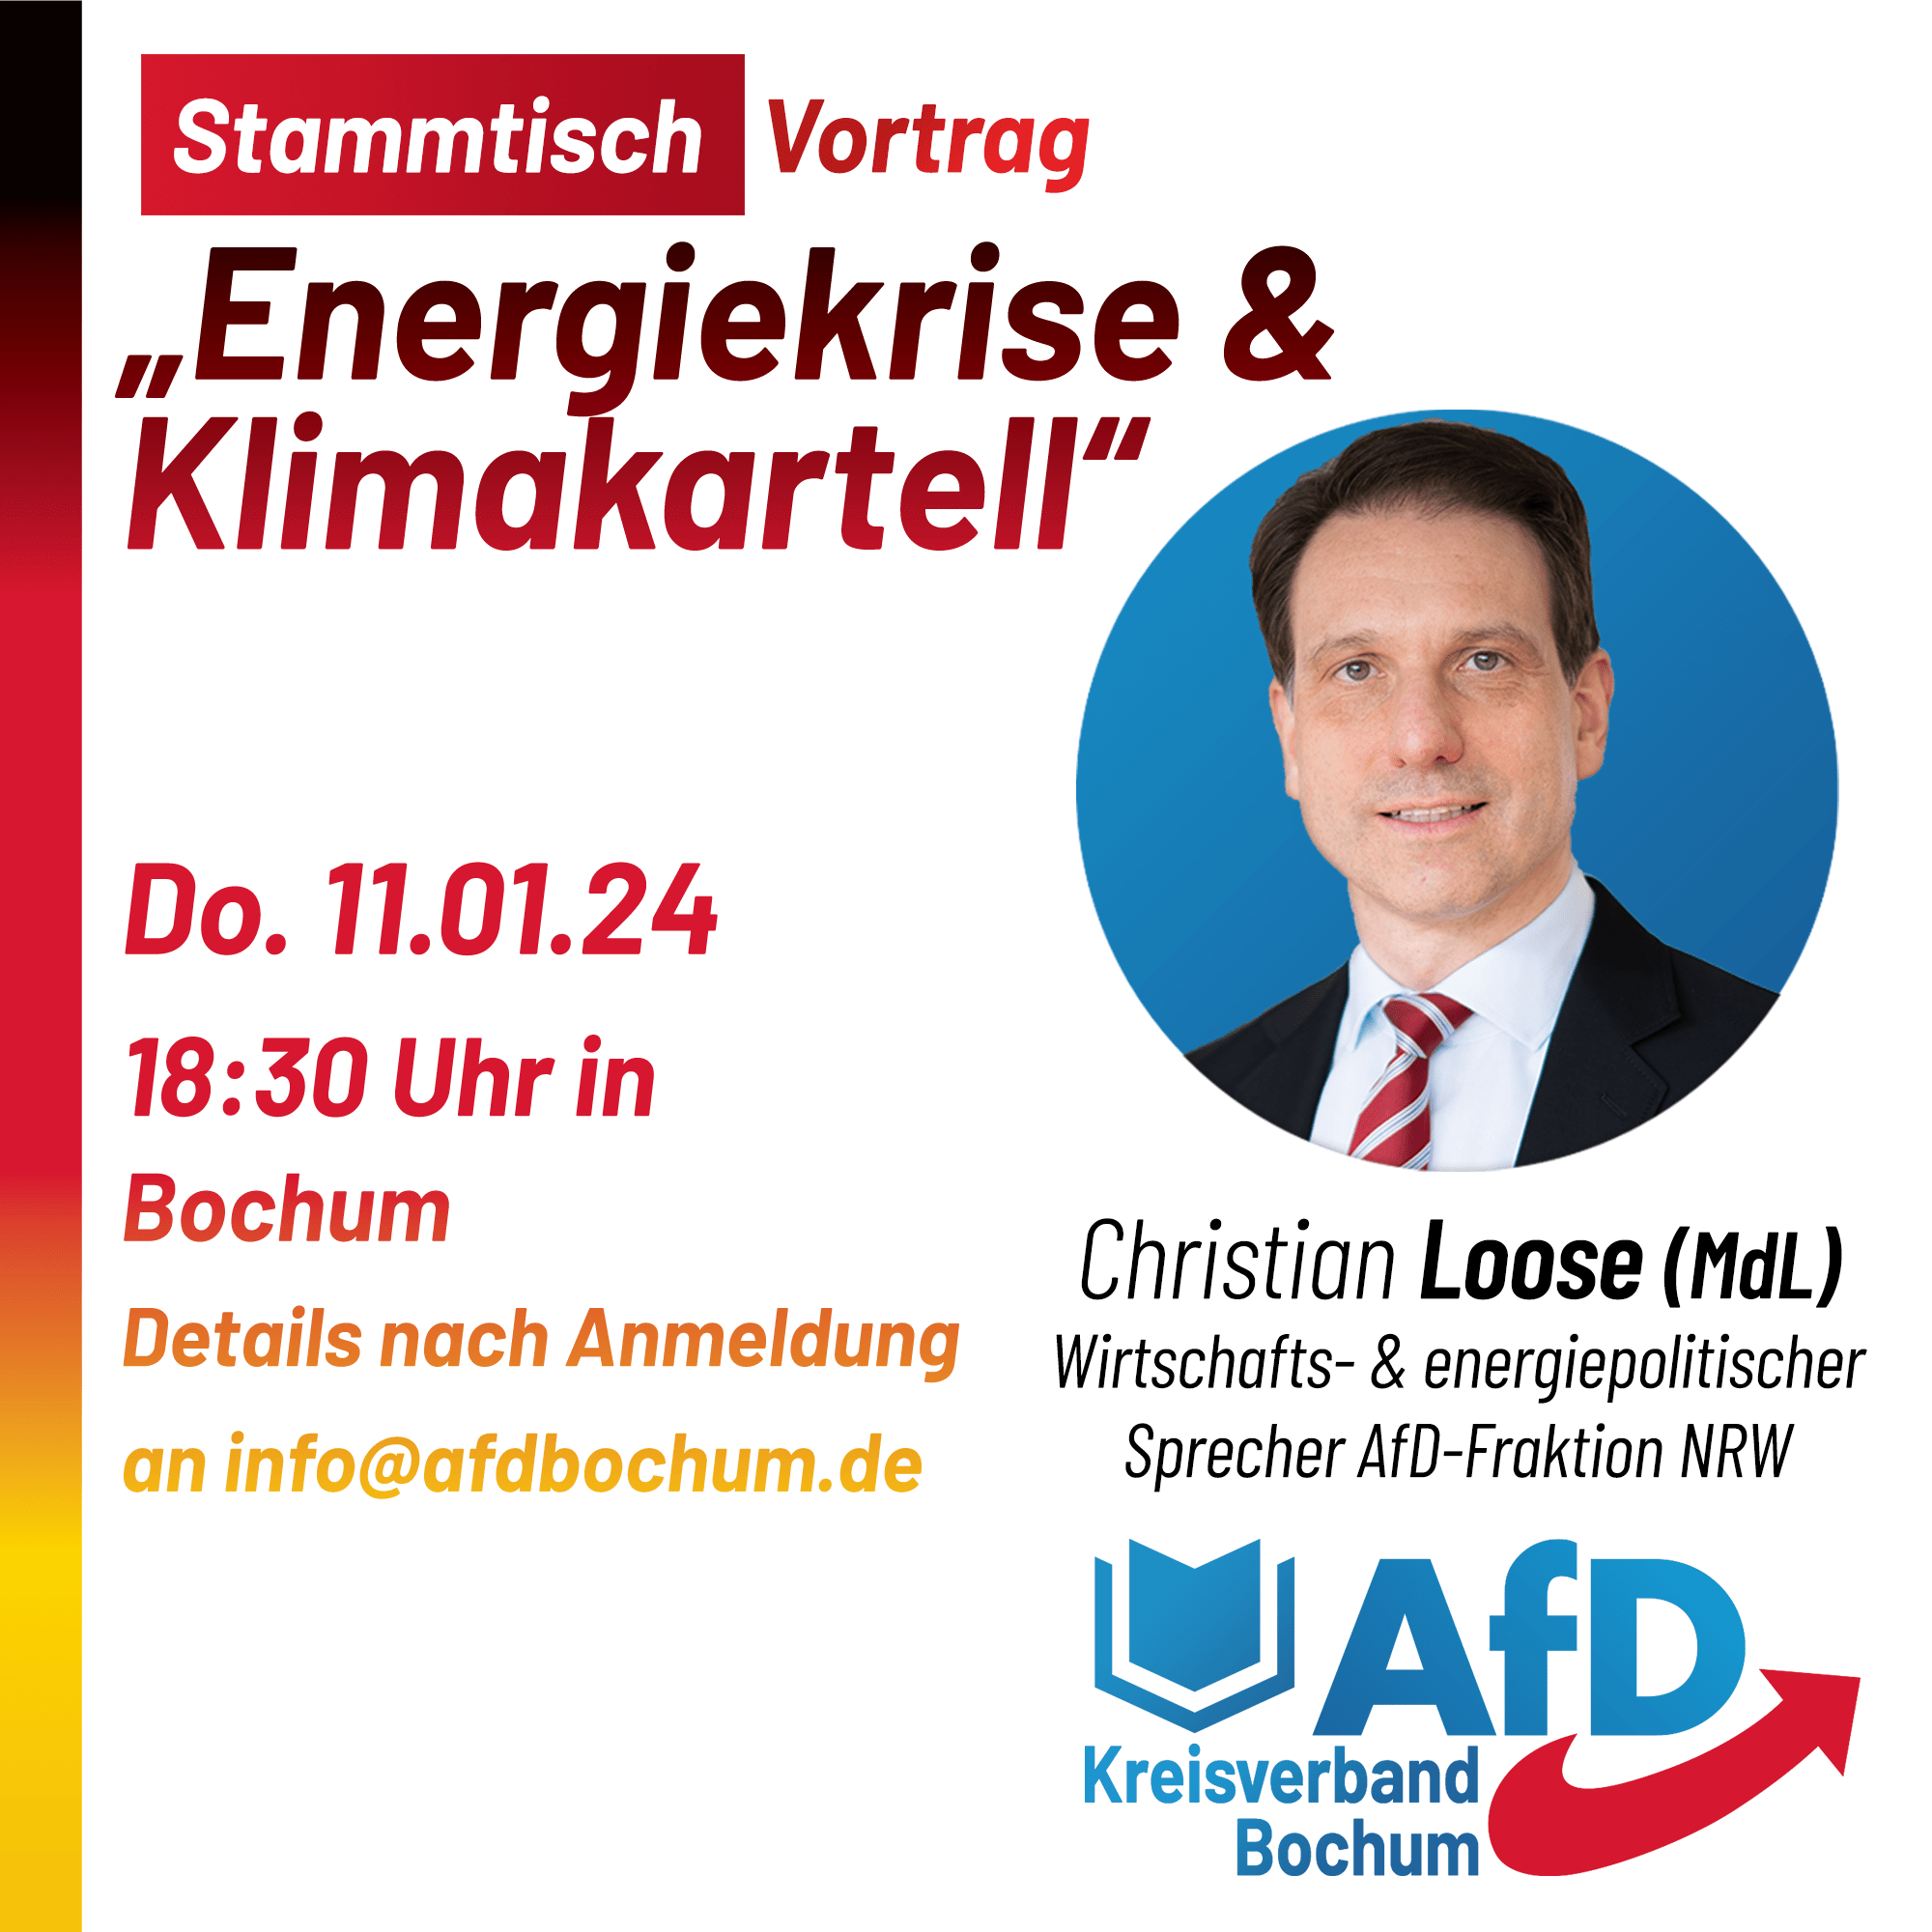 You are currently viewing Stammtisch-Vortrag Bochum m. Christian Loose MdL